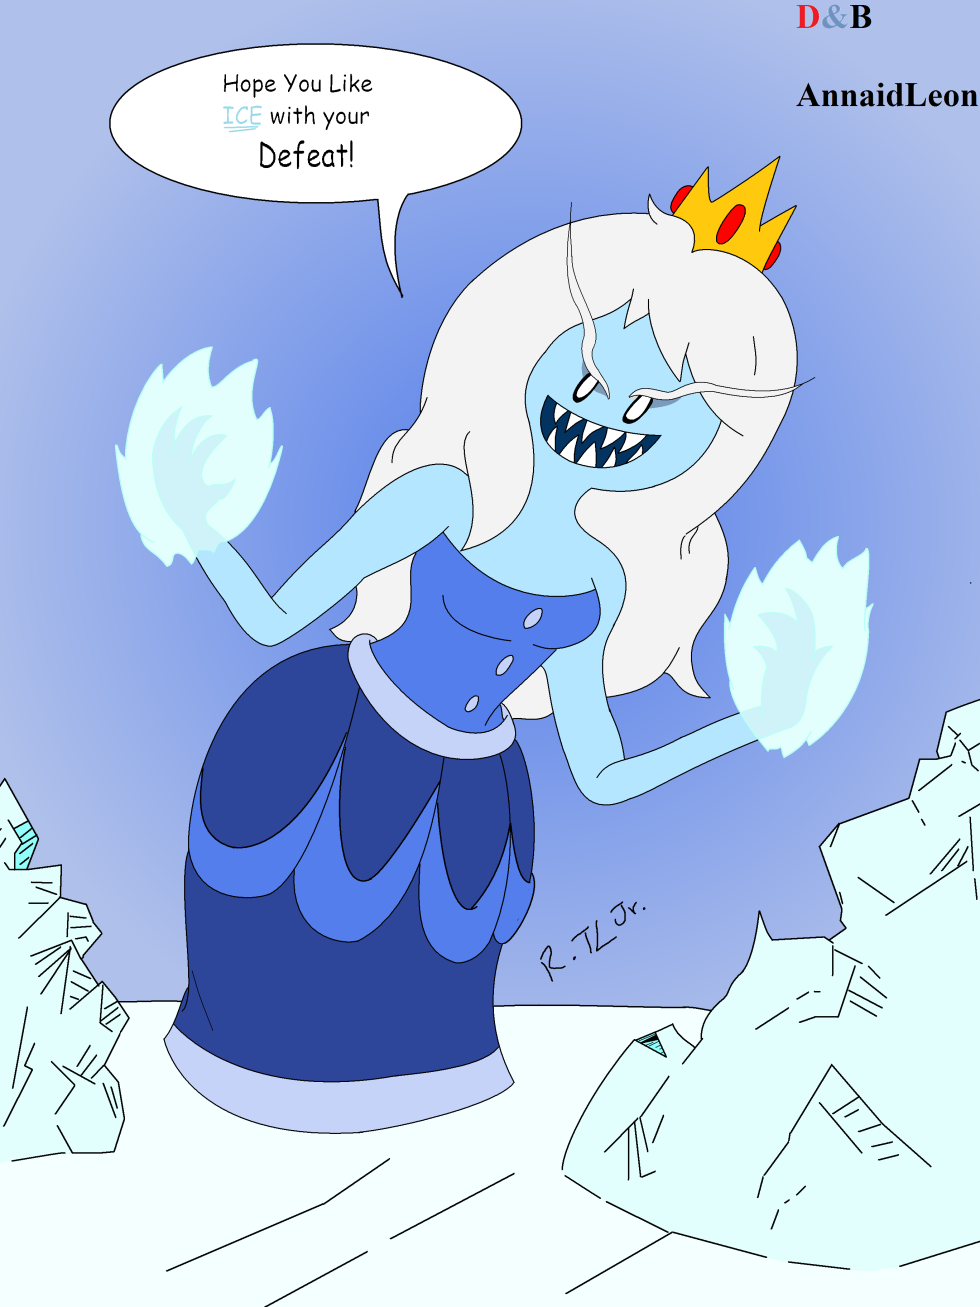 adventure time ice queen age